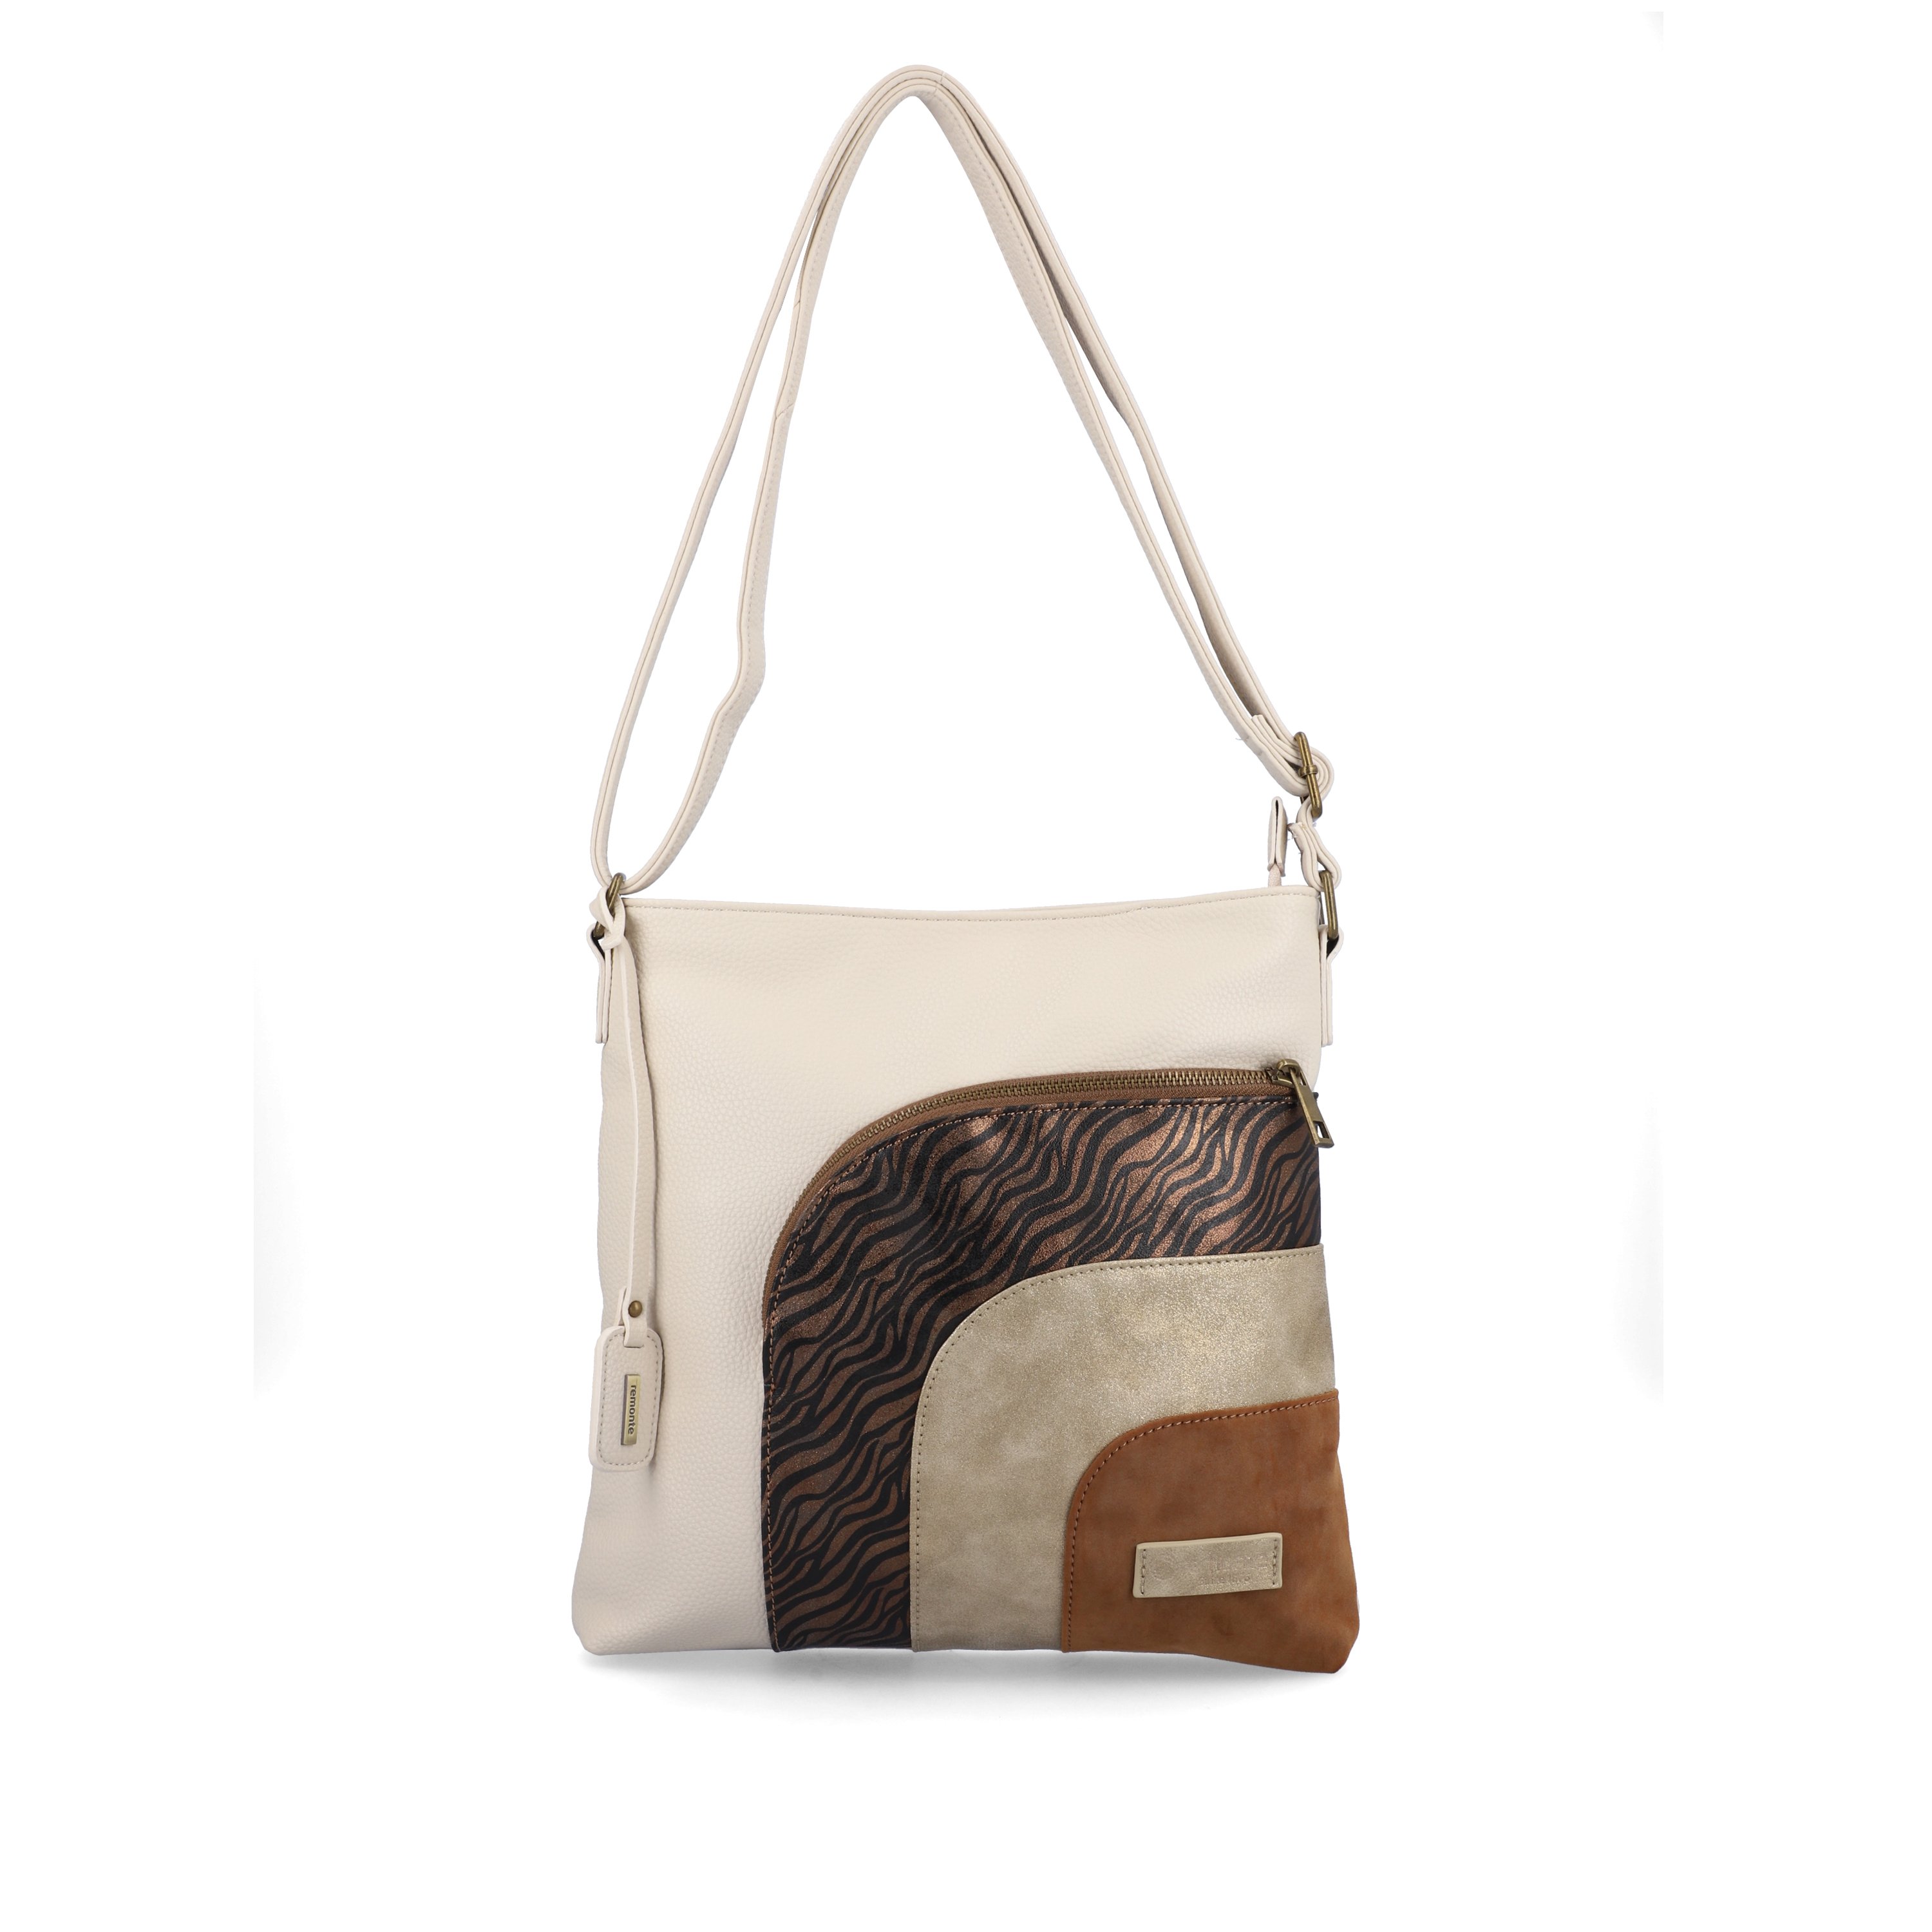 remonte women´s bag Q0705-60 in beige made of imitation leather with zipper from the front.